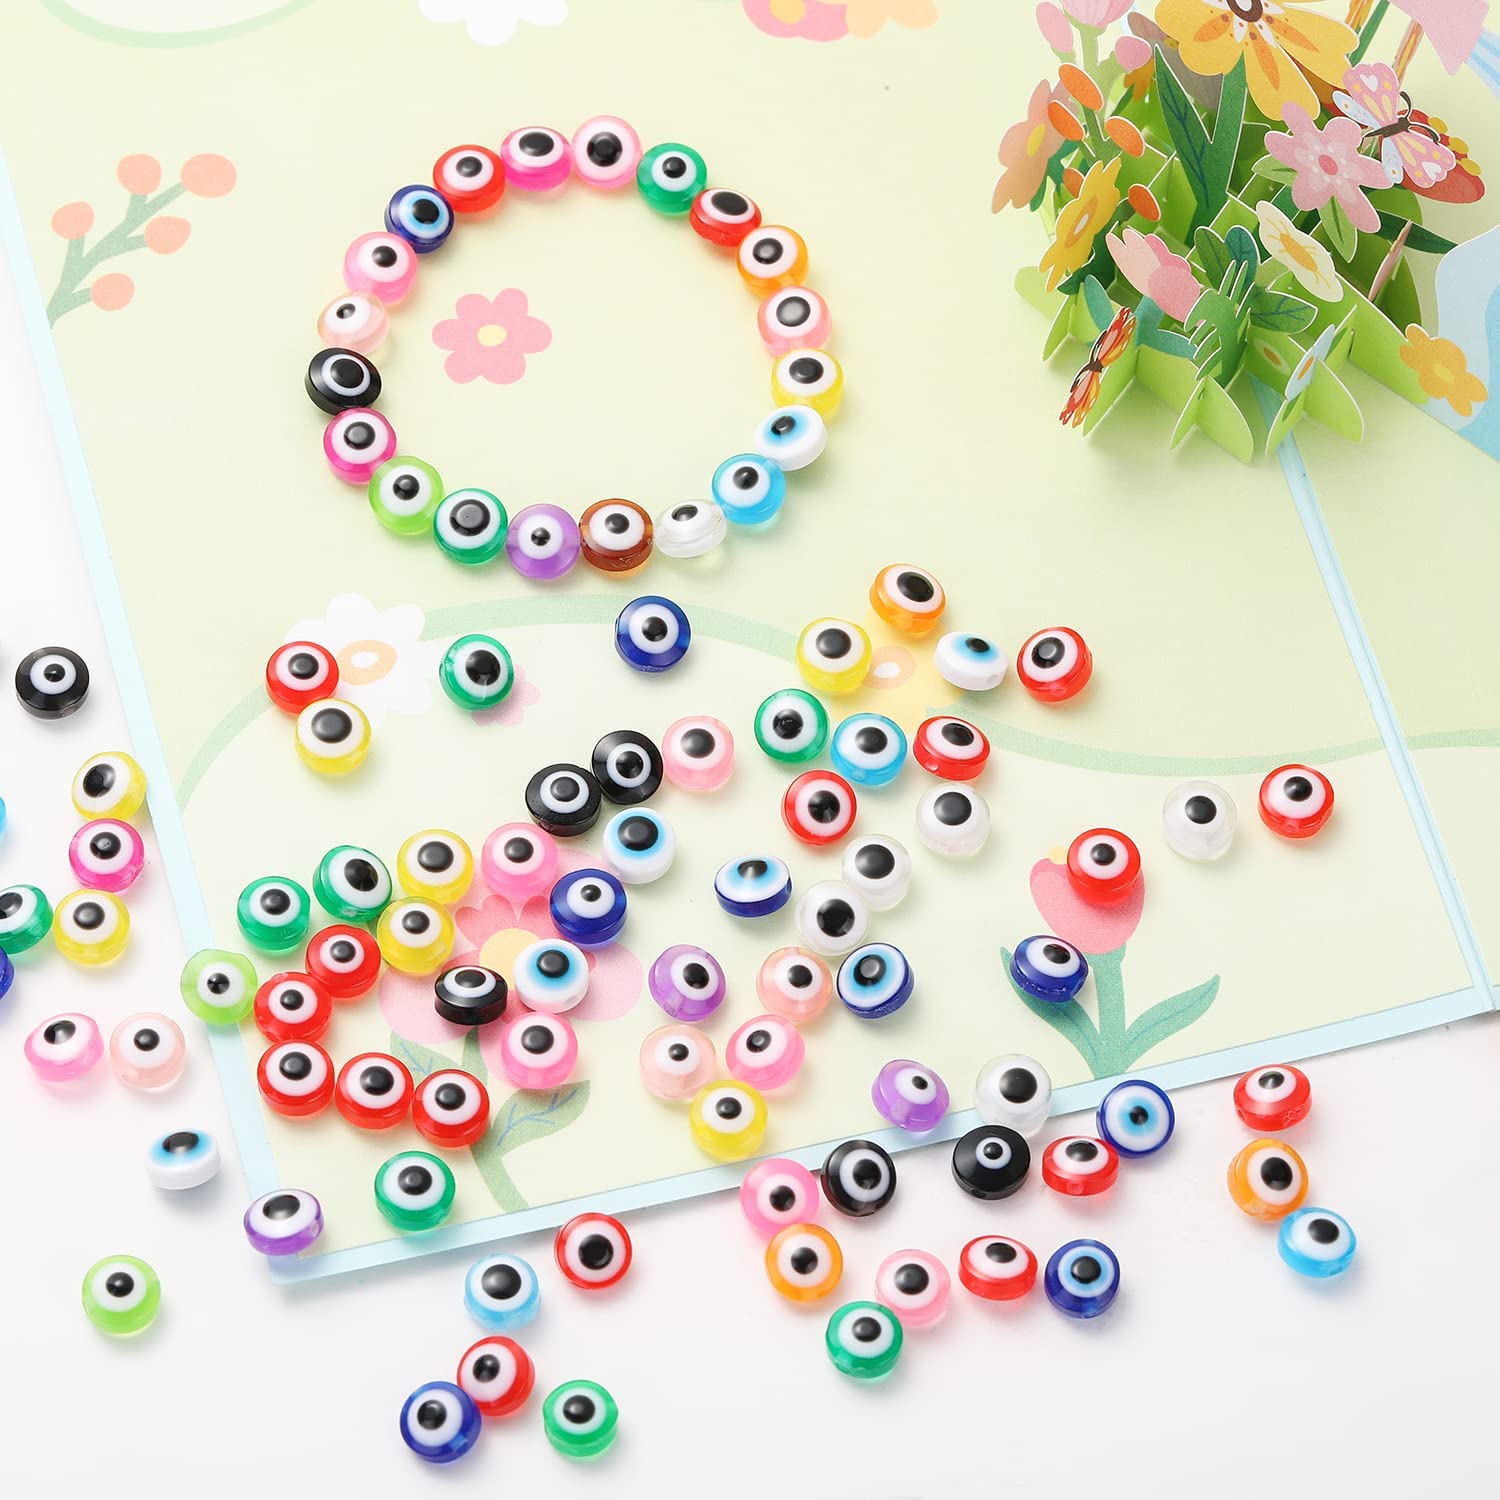 200 Pieces Evil Eye Beads 8mm Handmade Resin Evil Eye Beads Flat Round Evil  Eye Charms Beads for DIY Bracelets Jewelry Making (Mix Colors)